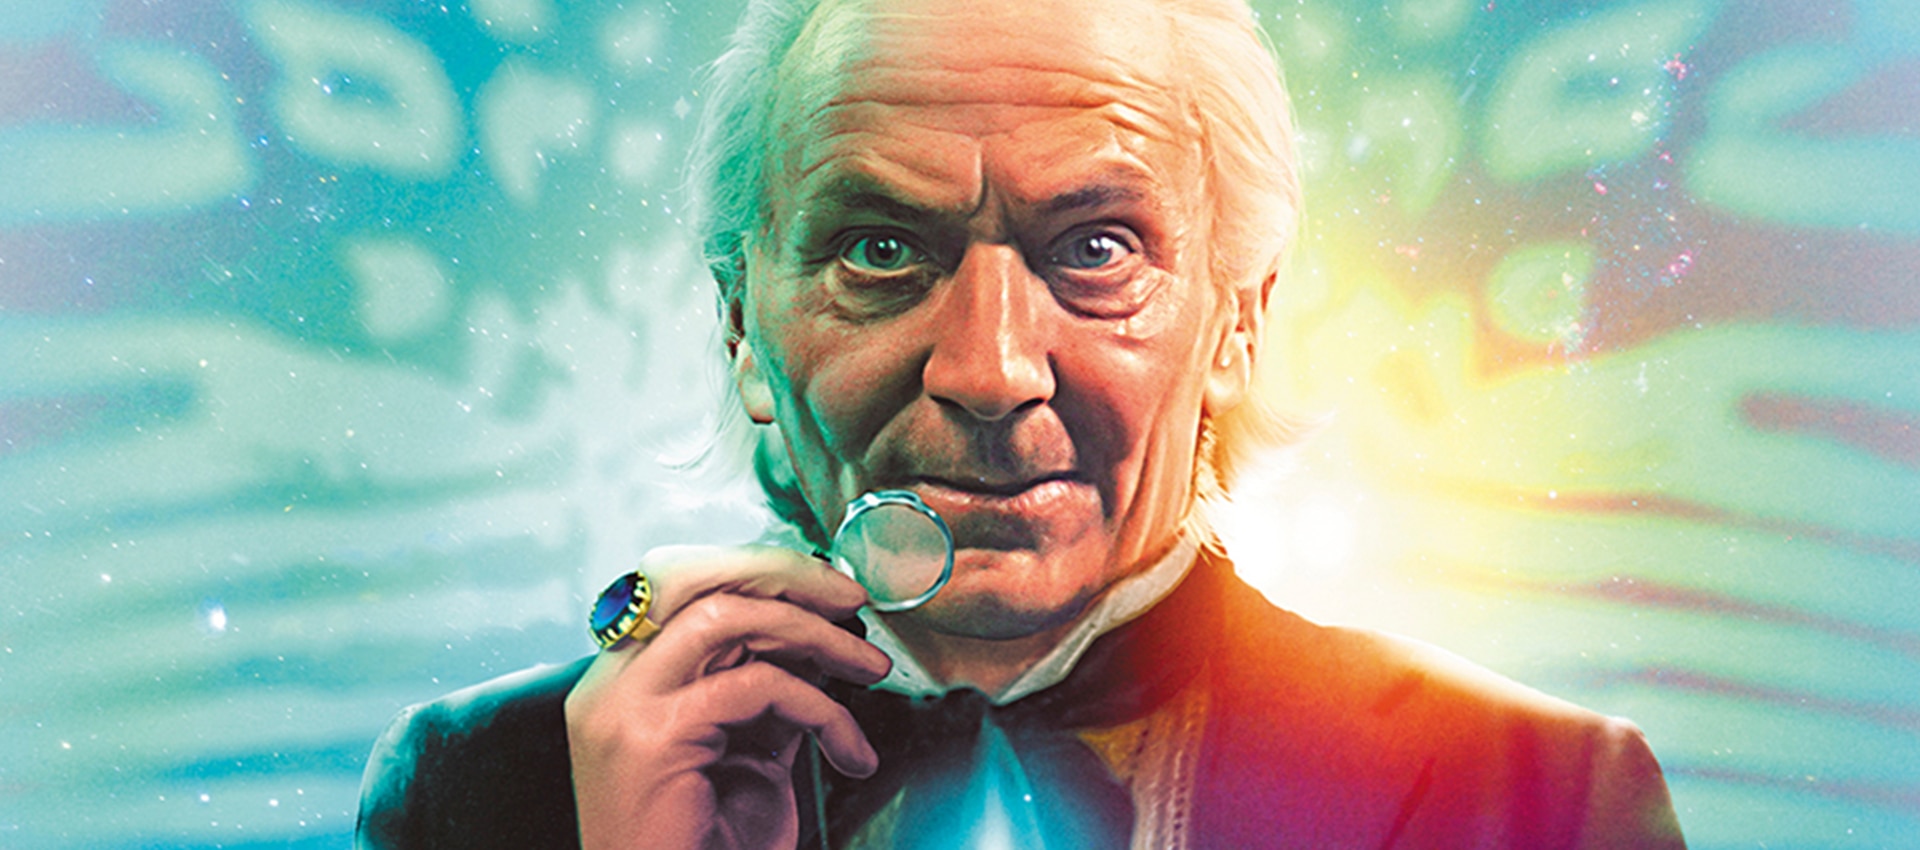 Doctor Who: William Hartnell Complete Season 2 (Blu-ray)